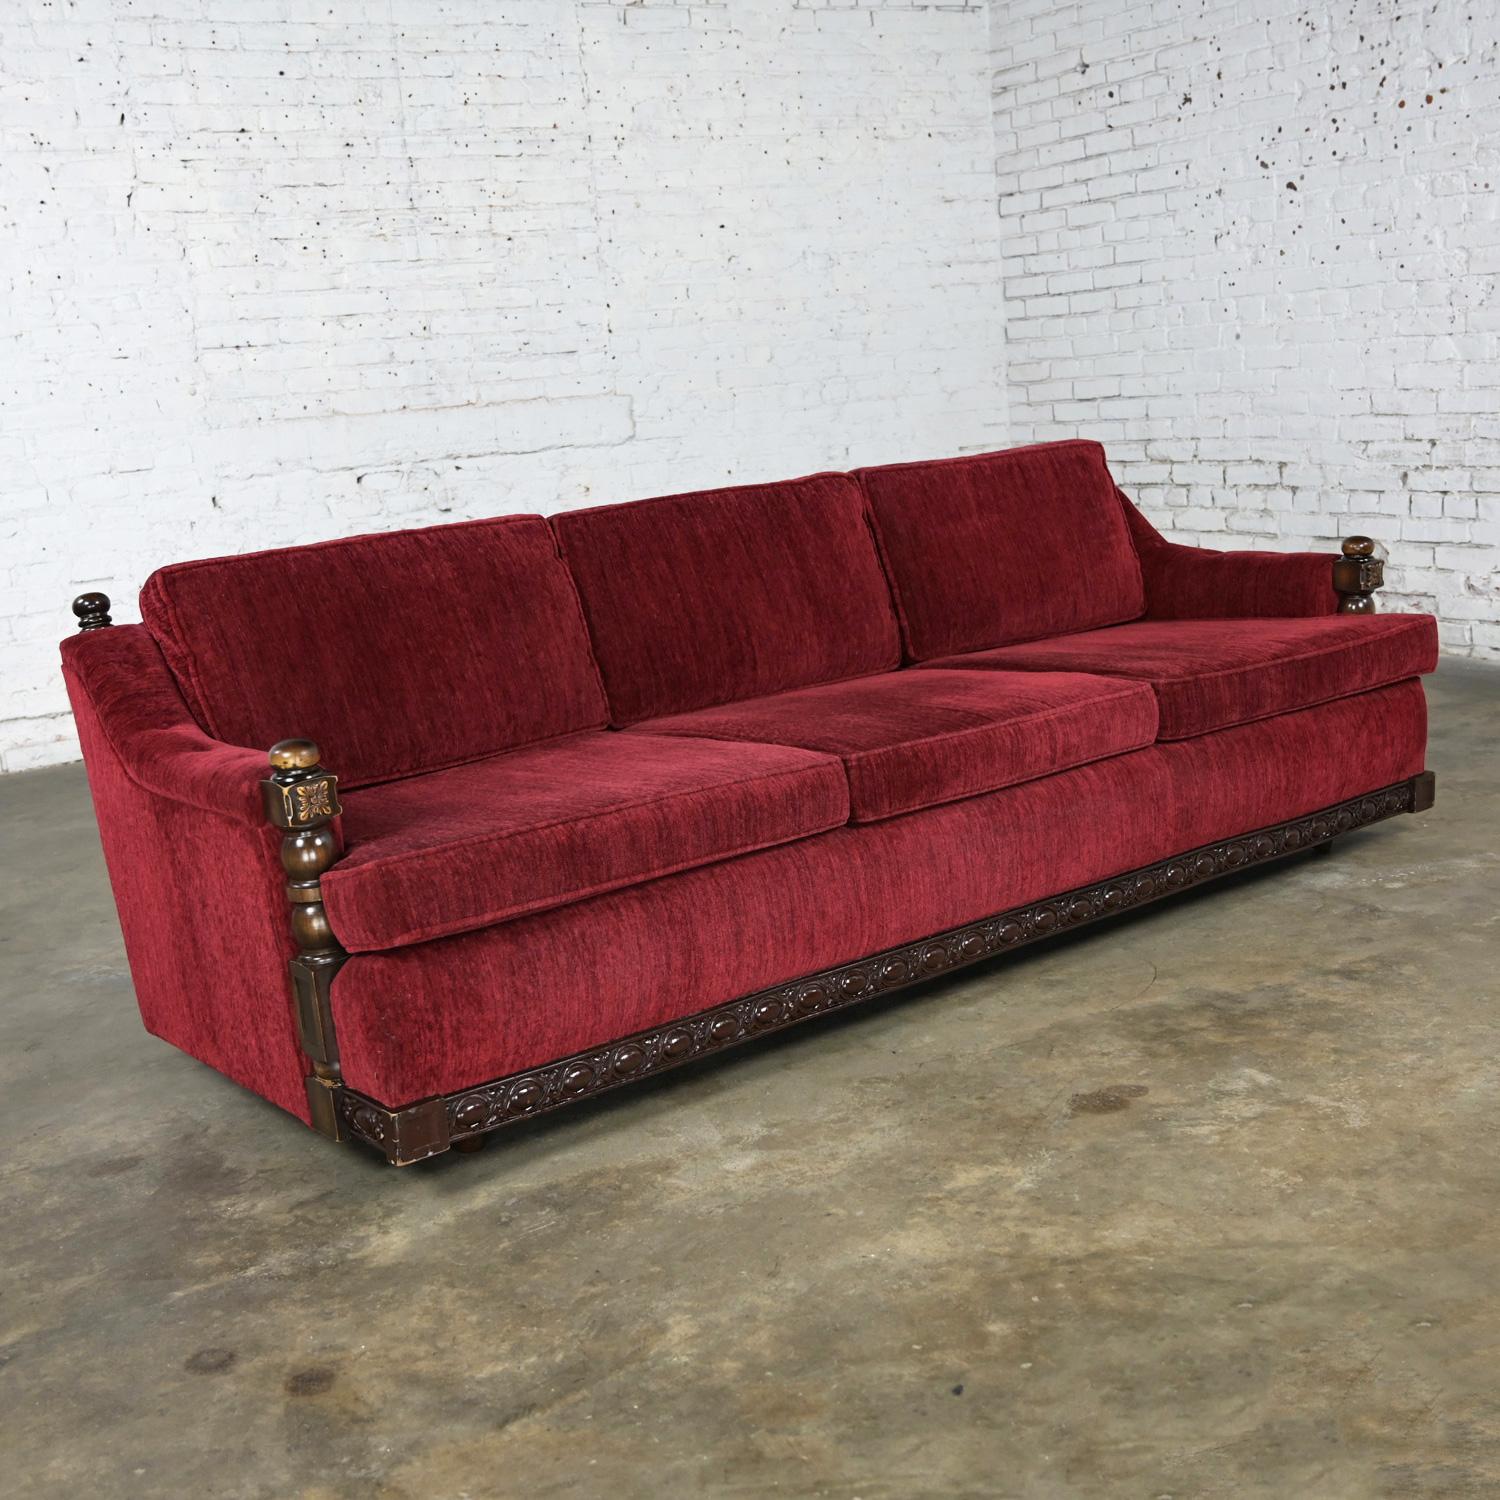 Spanish Colonial 1970's Spanish Revival Rustic Red Chenille Sofa Style Artes De Mexico Internls For Sale